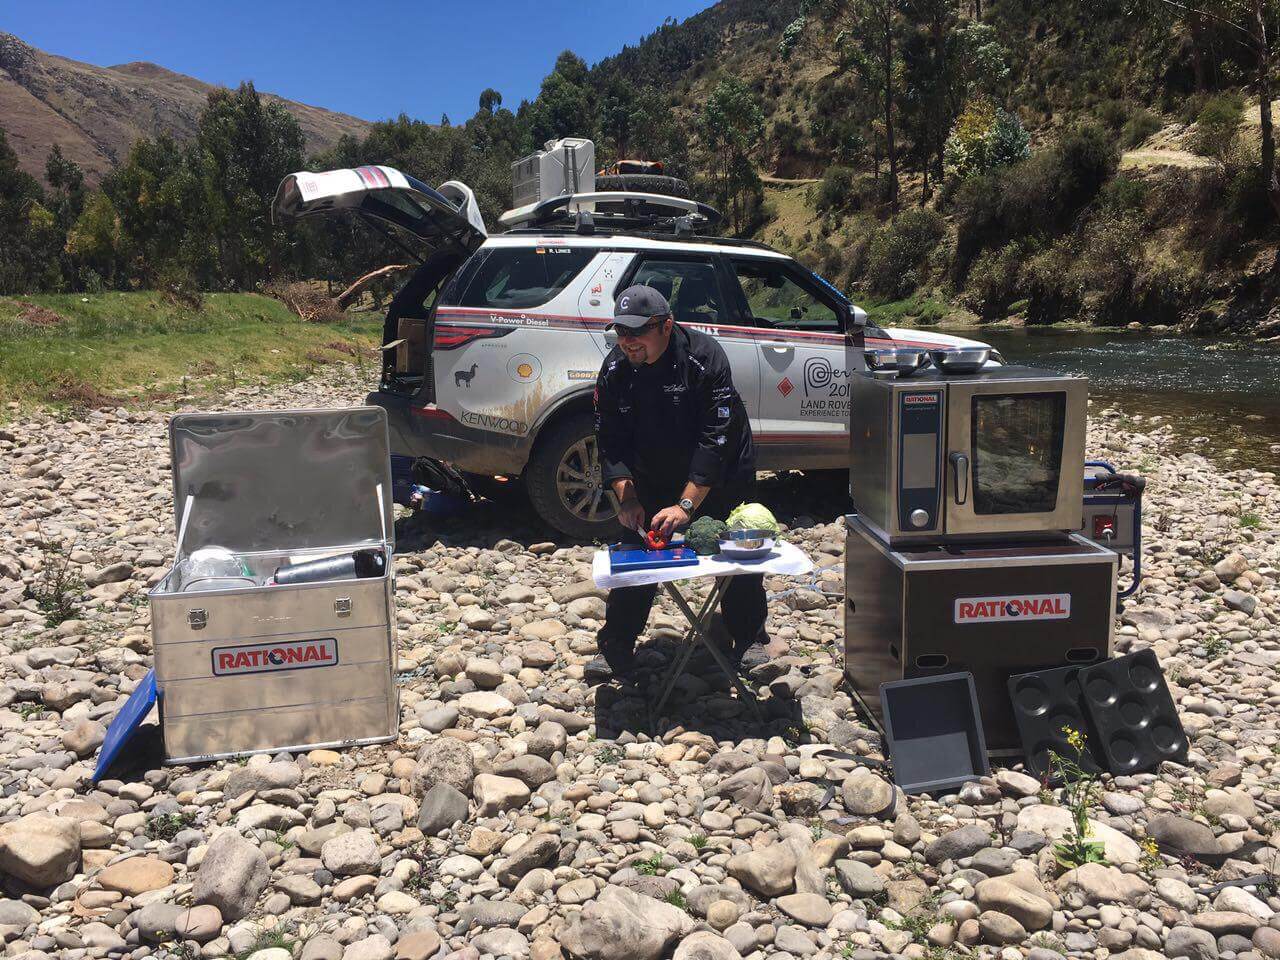 Landrover Tour 2019 Offroad cooking